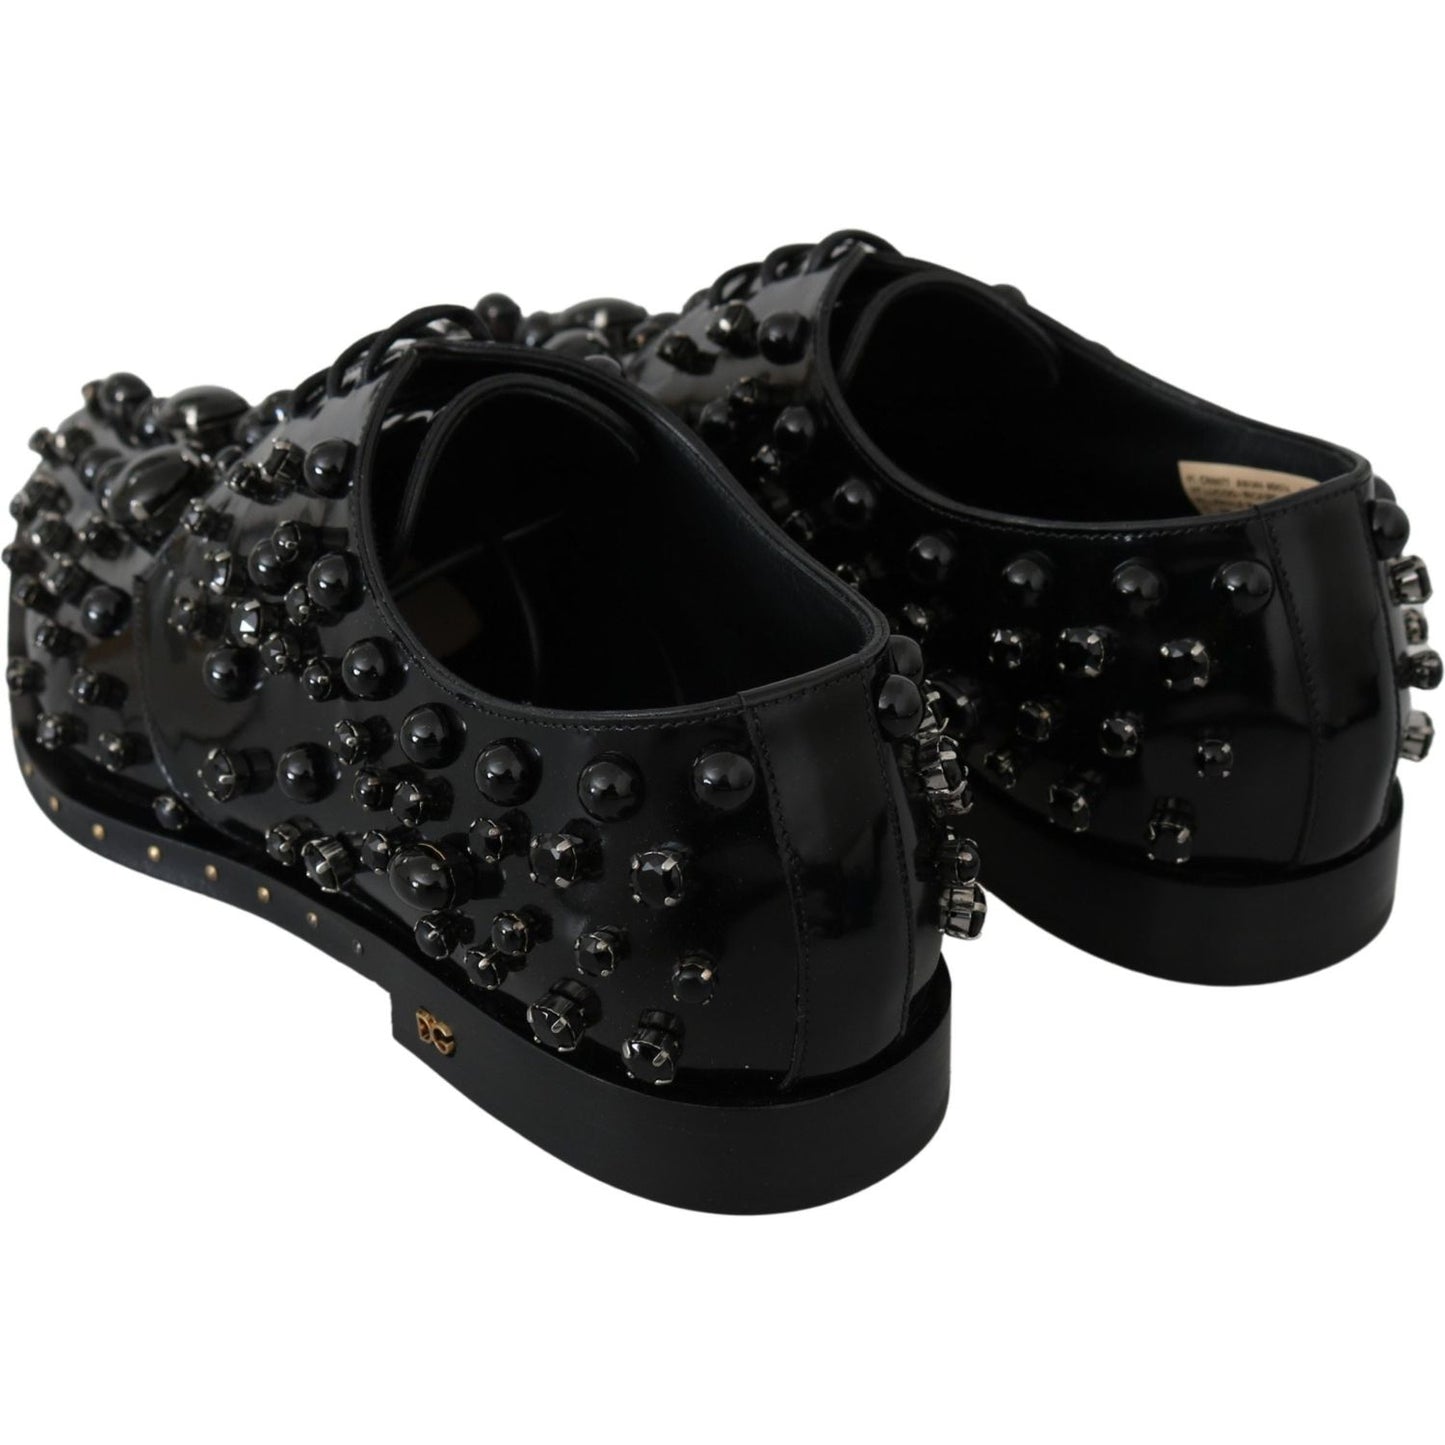 Dolce & Gabbana Elegant Black Dress Shoes with Crystals black-leather-crystals-dress-broque-shoes-1